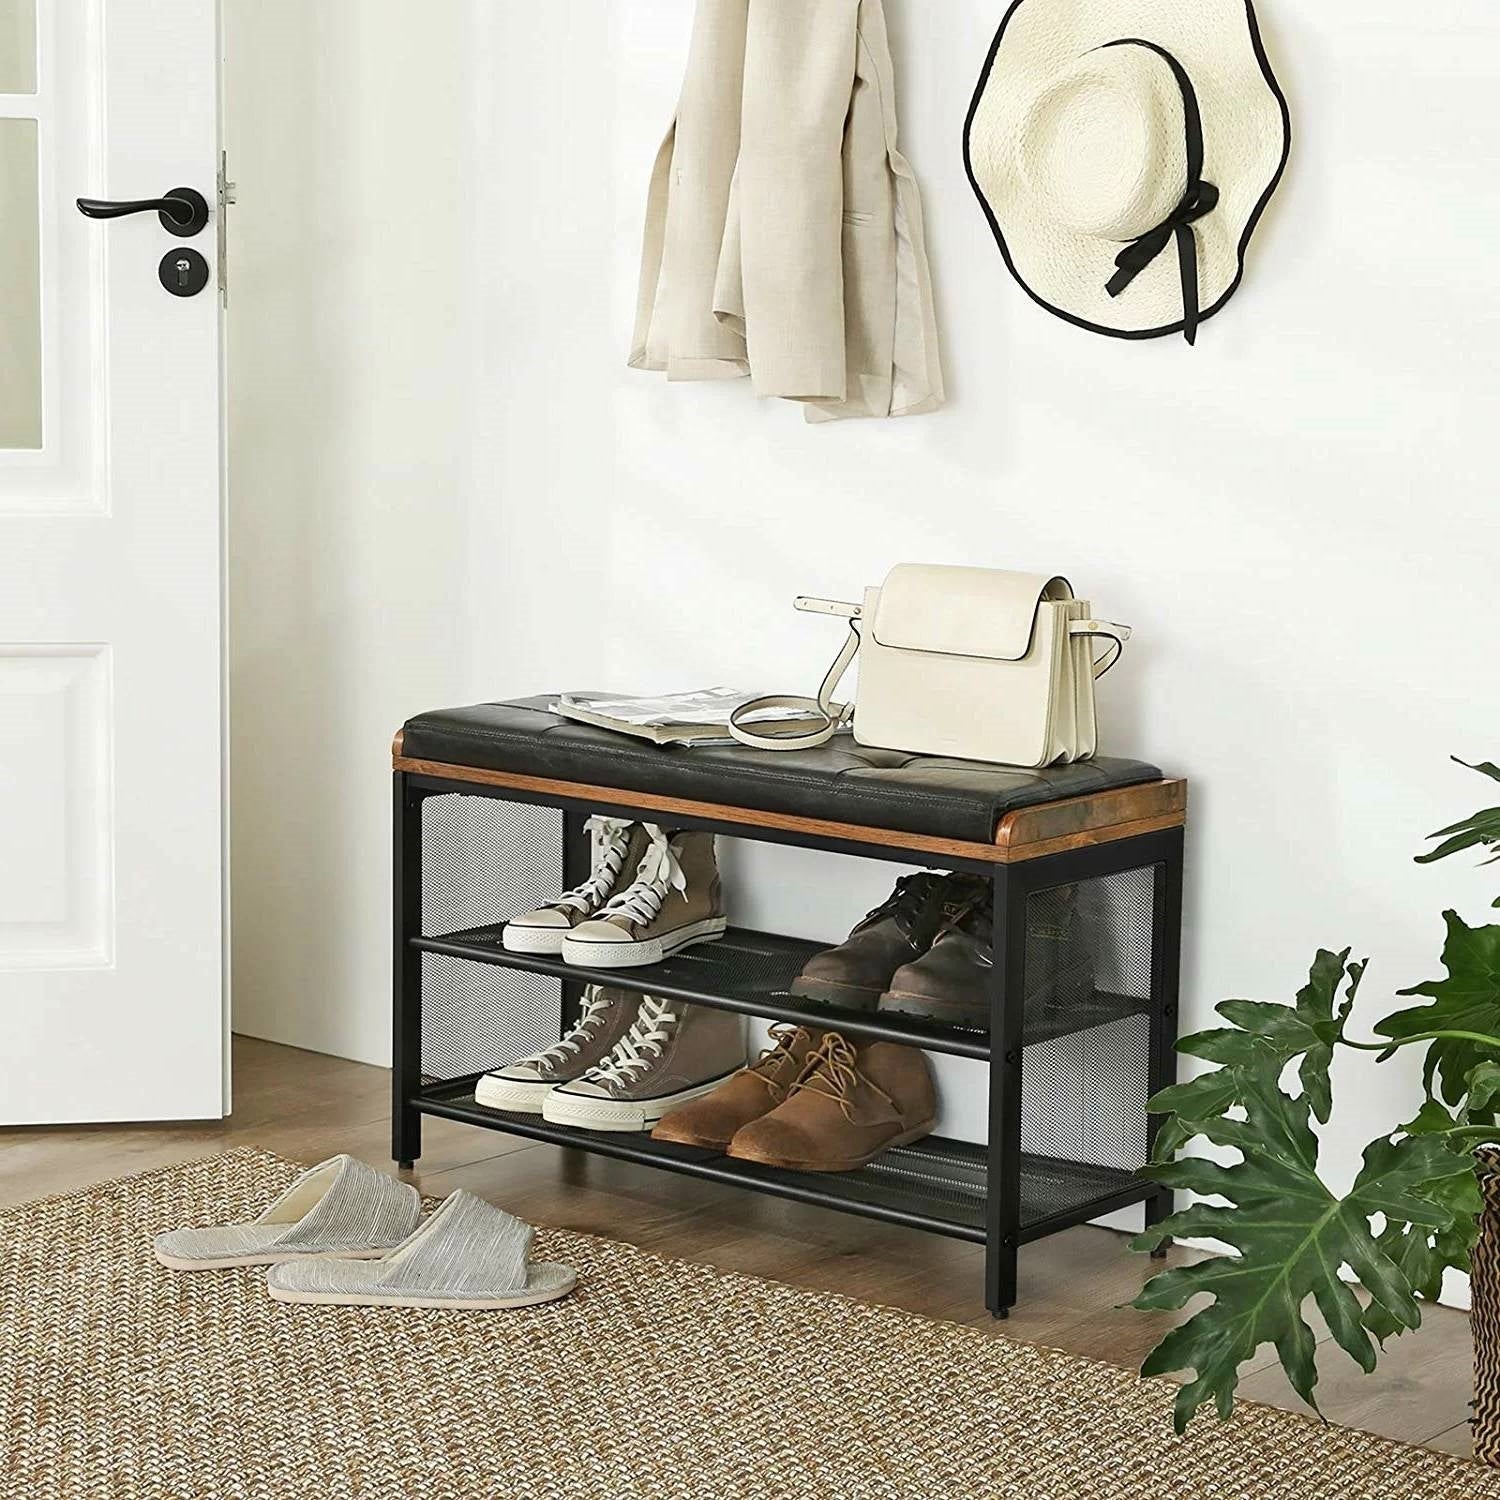 Accents > Shoe Racks - Black Metal Entryway Shoe Rack Storage Bench With Padded Seat Cushion